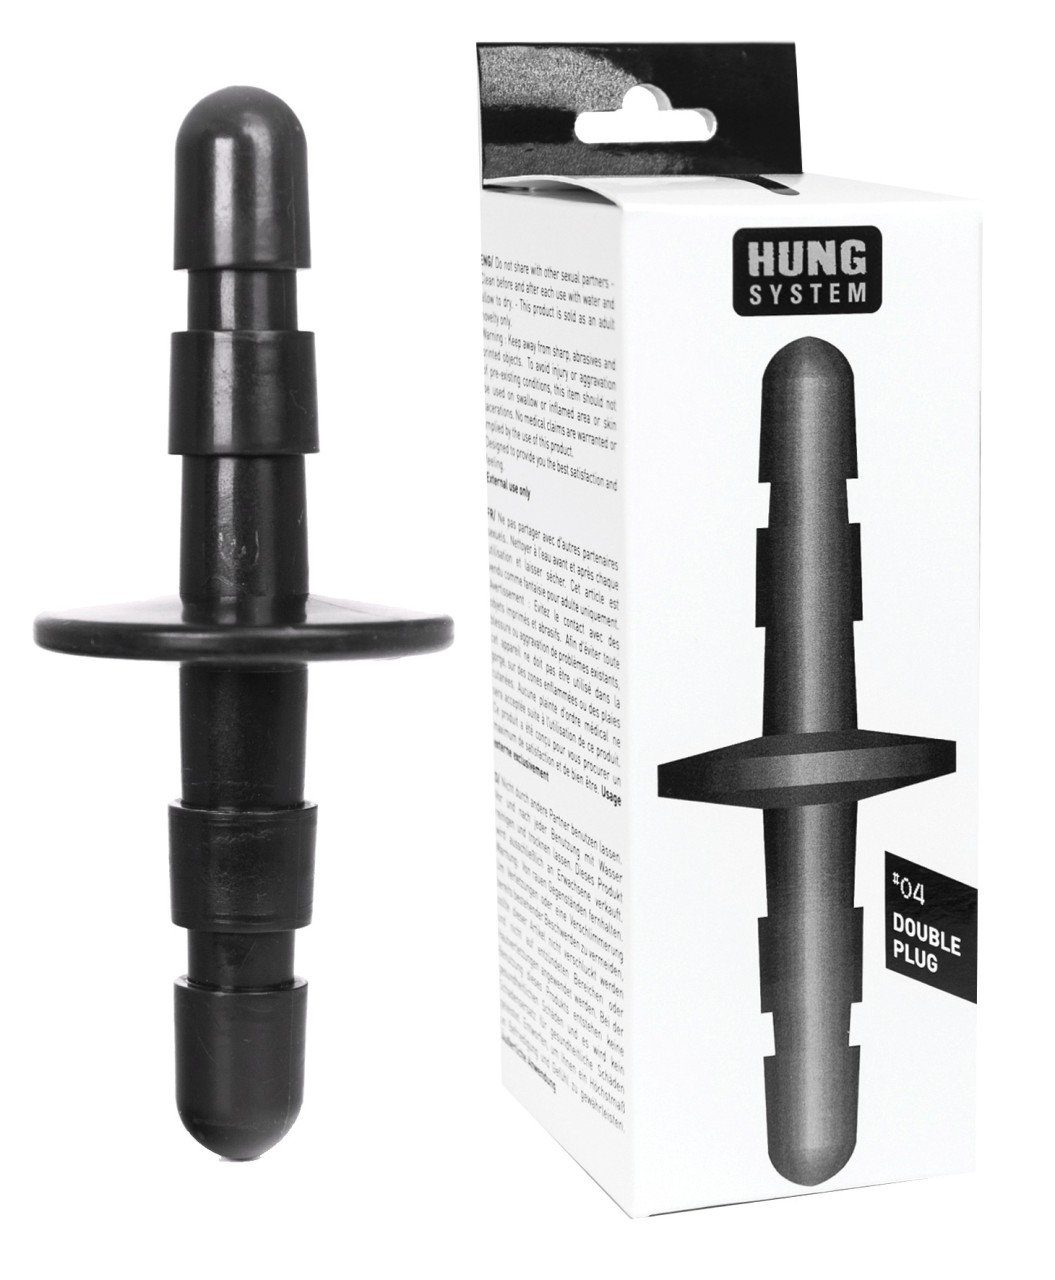 Rocks-Off HUNG SYSTEM Dildo HUNG SYSTEM Double Insert/Double Plug black, Toys für Alle,Hung System,HUNG SYSTEM,Import-ST Rubber,women,men,HU